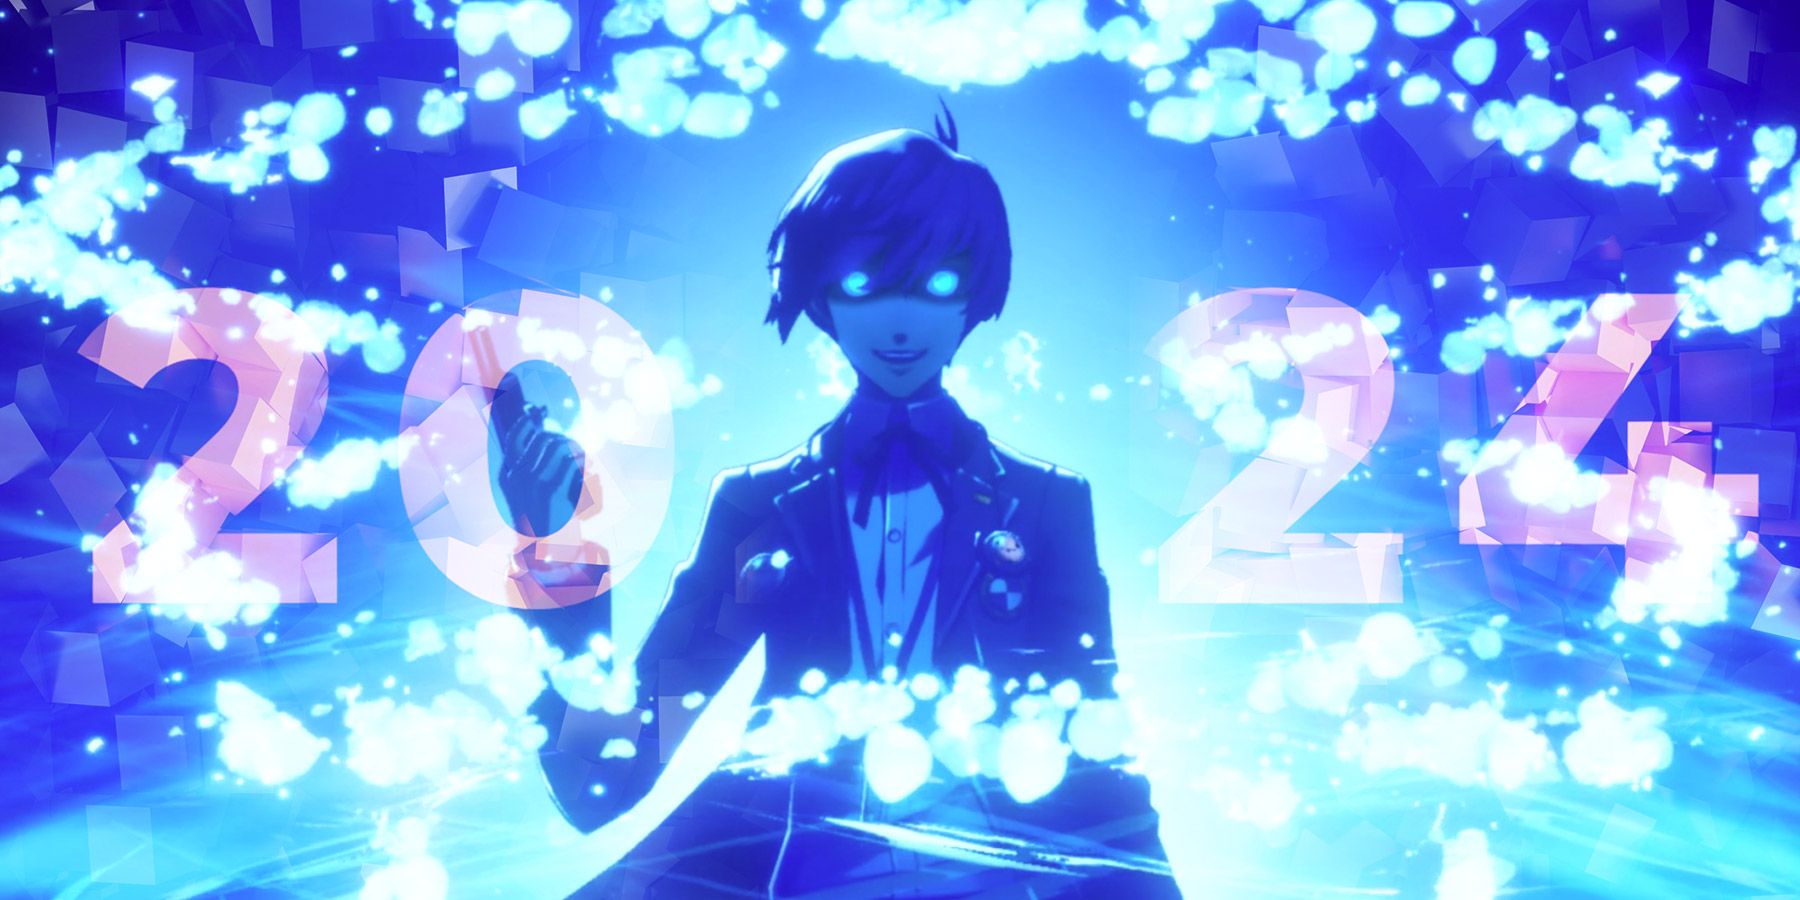 One SEES Member in Persona 3 Reload Needs a Far Greater Story Role Than  Before